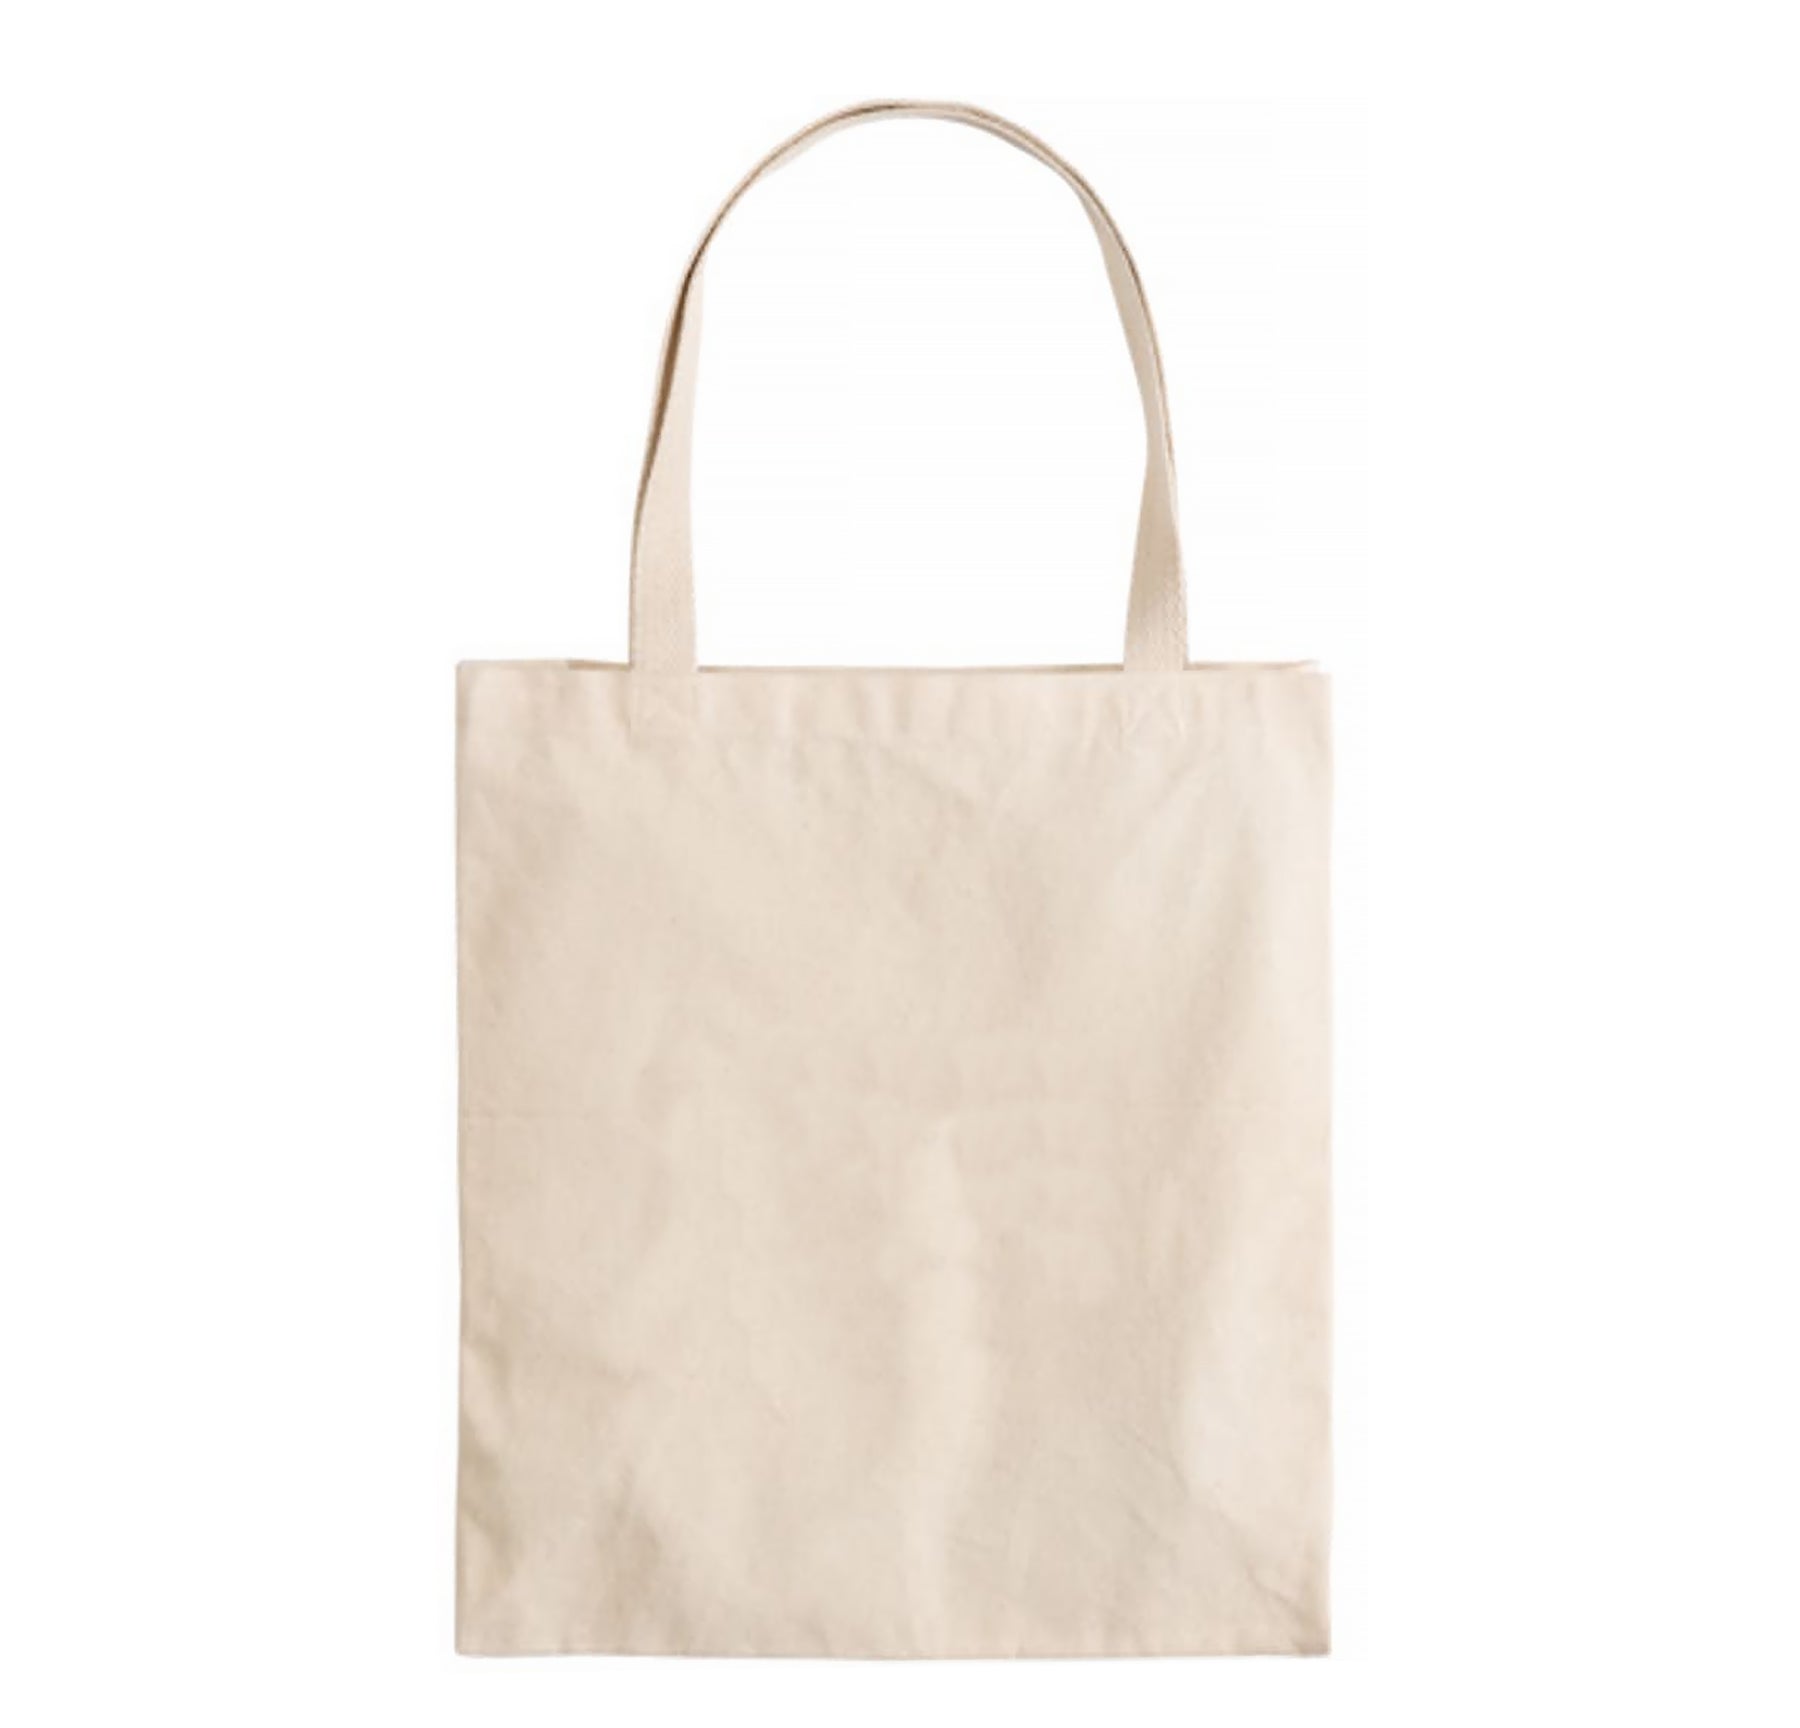 Blank promotional cotton tote bags